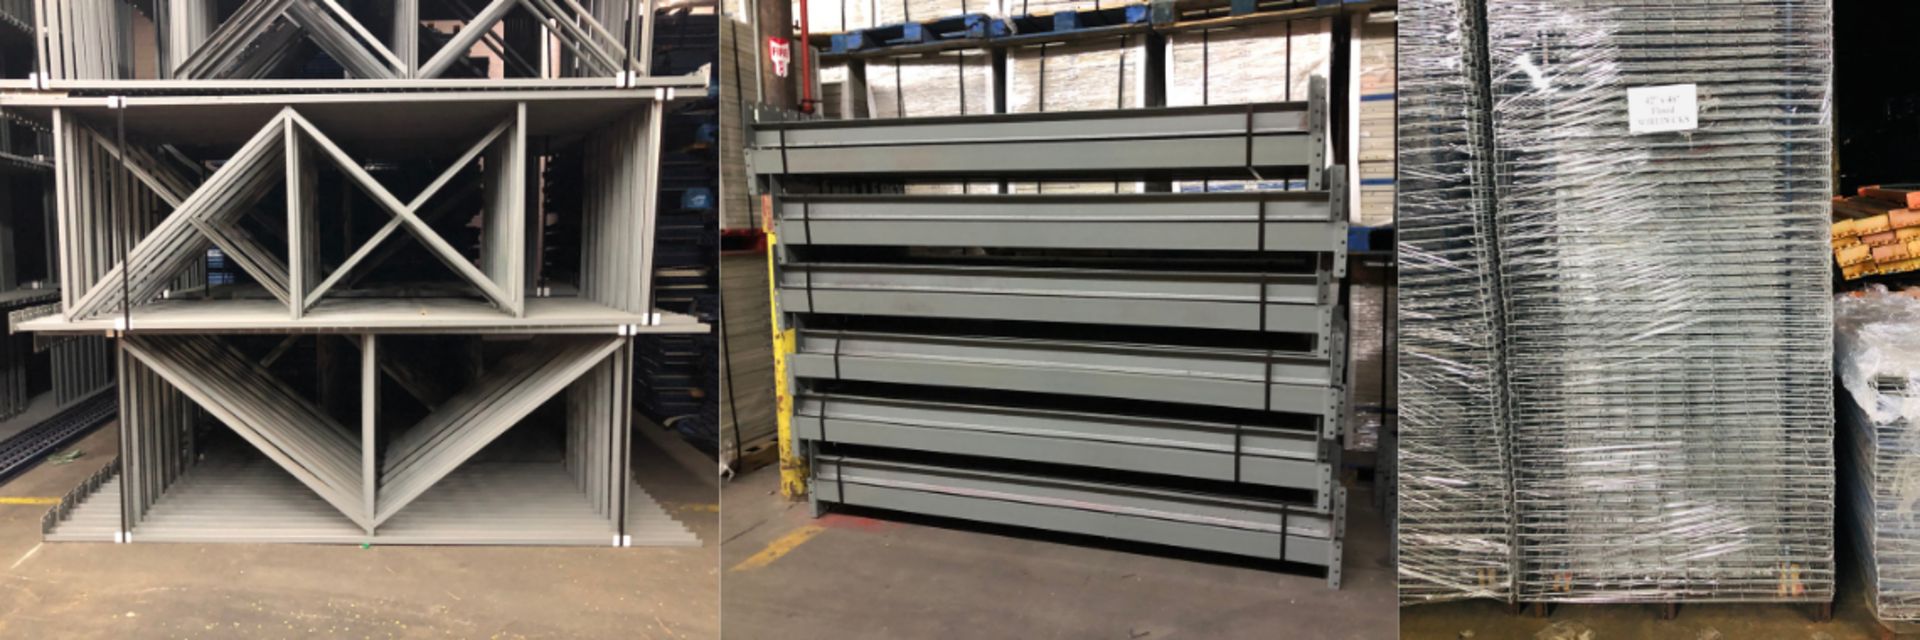 14 BAYS OF 10.5'H X 42"D X 93"L STRUCTURAL STYLE PALLET RACKS - Image 2 of 6